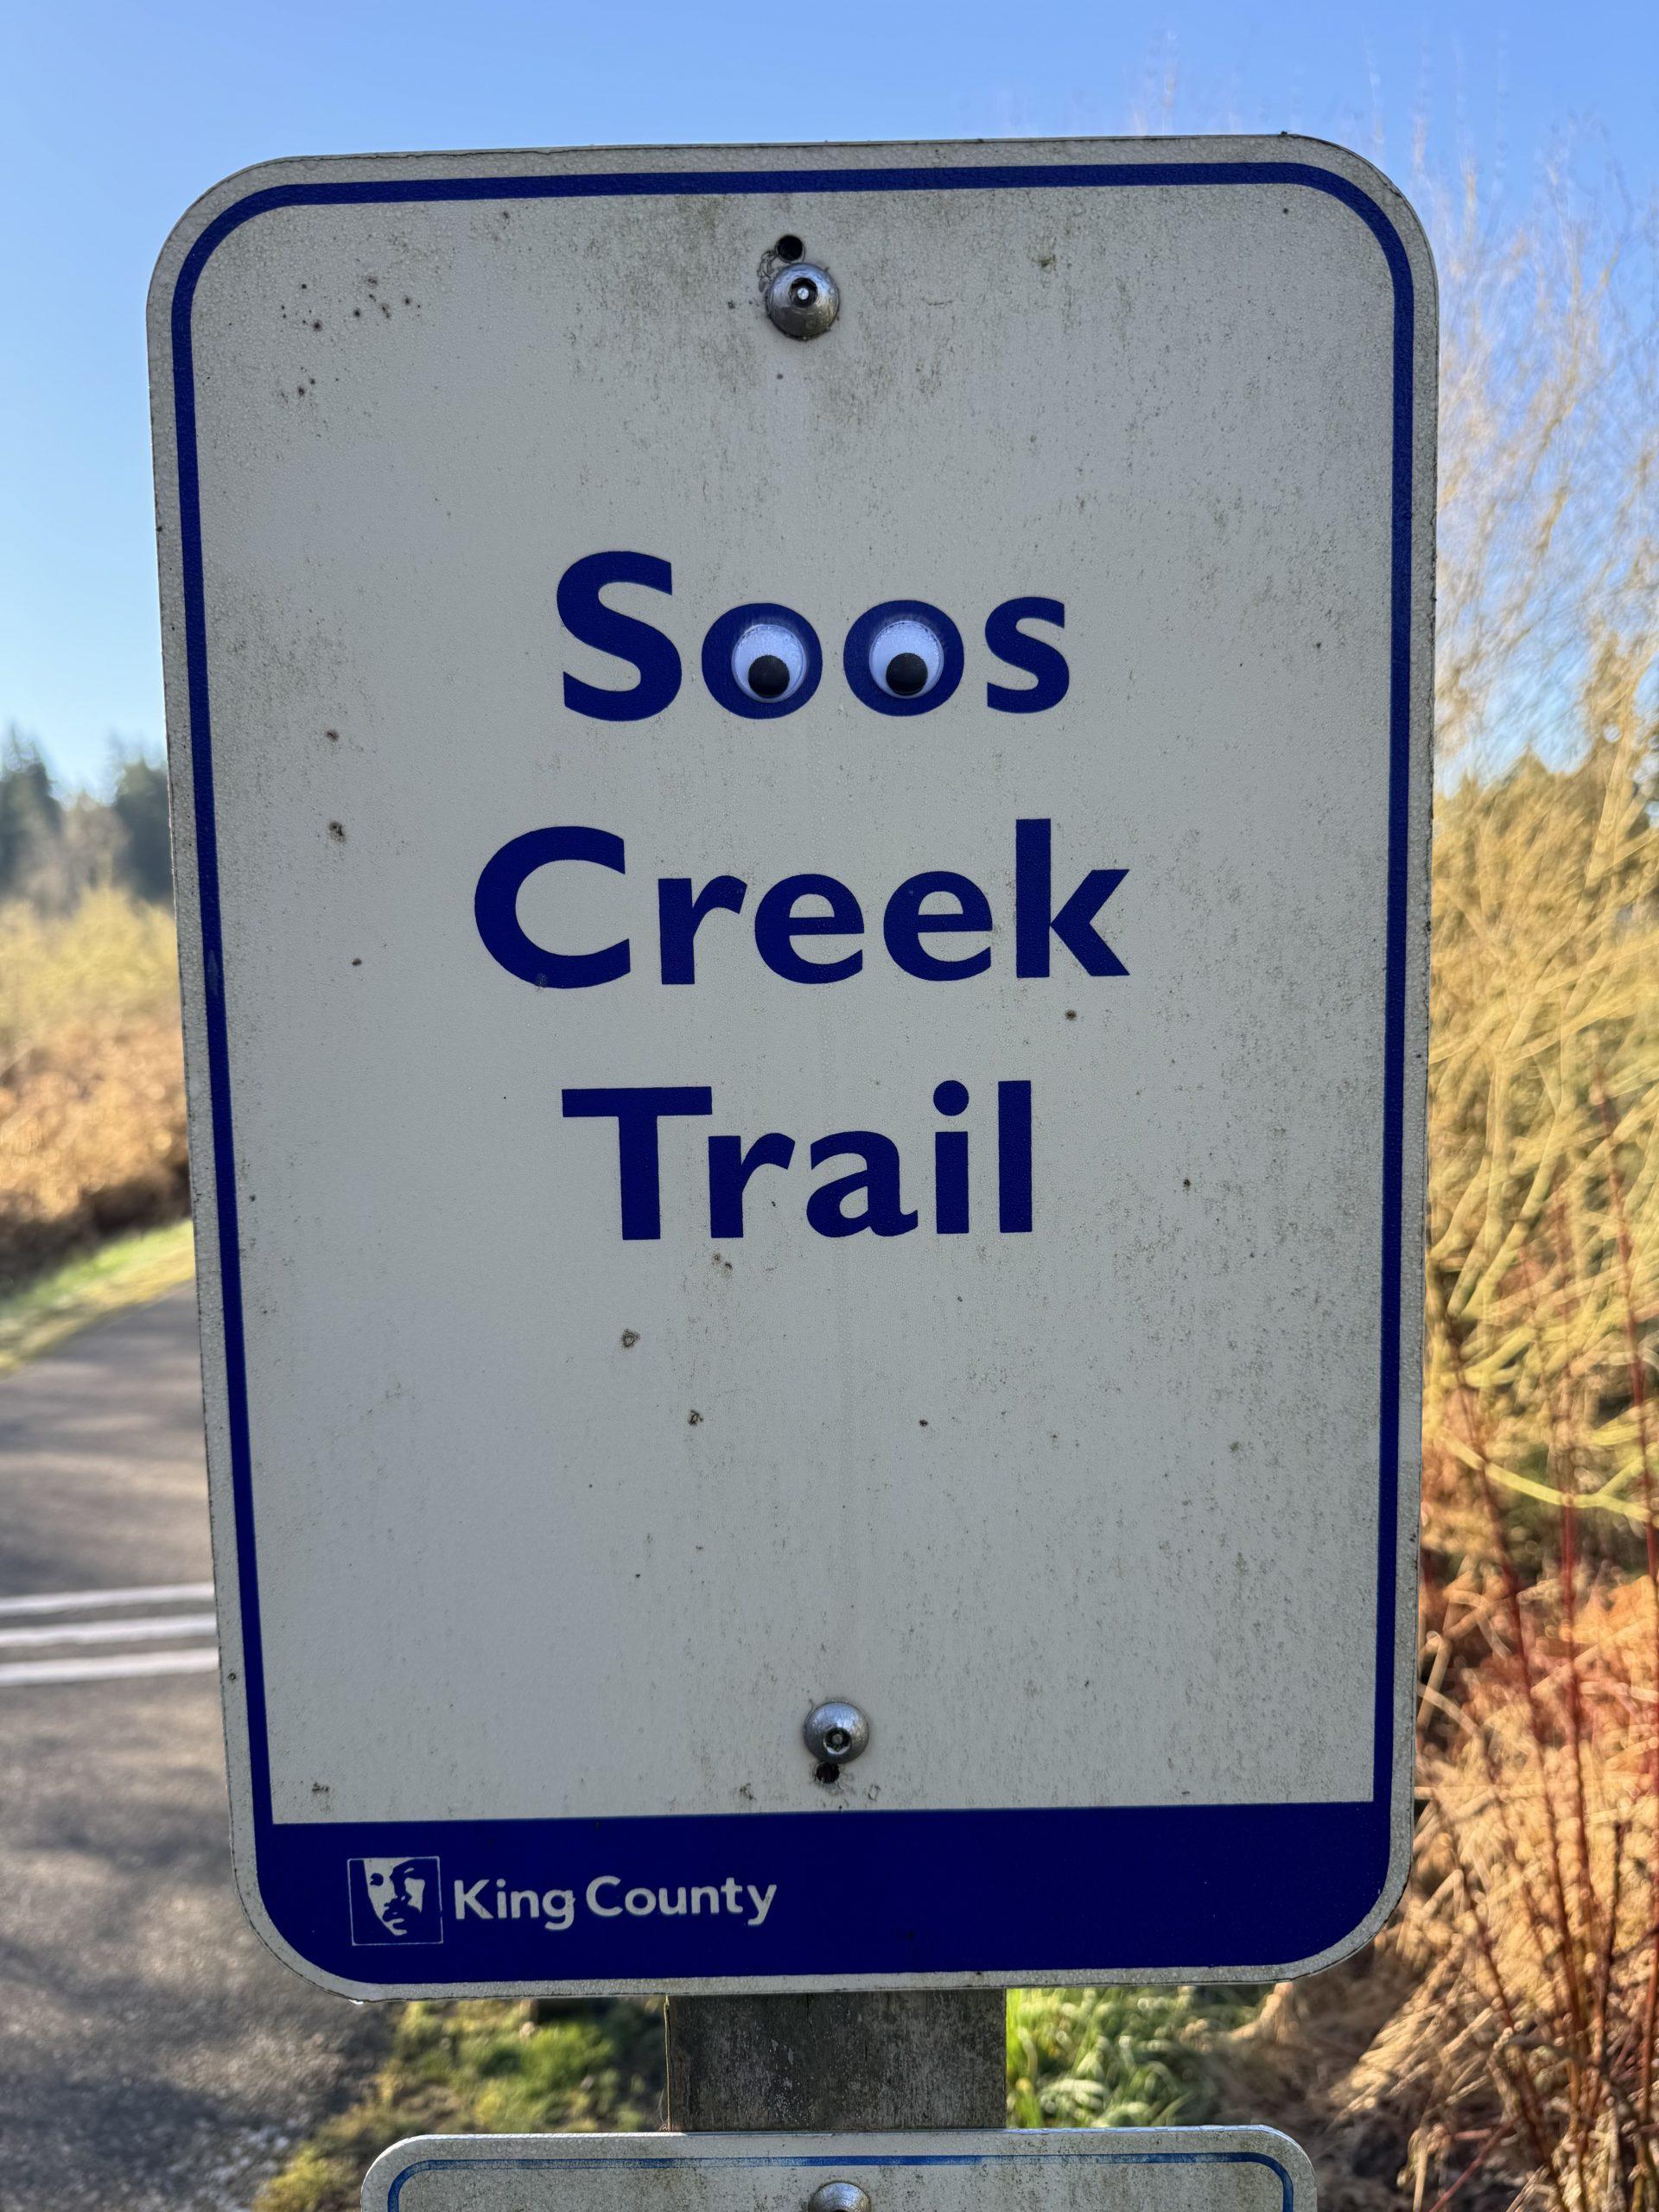 A trail sign for the Soos Creek Trail with googly eyes placed on both of the Os.